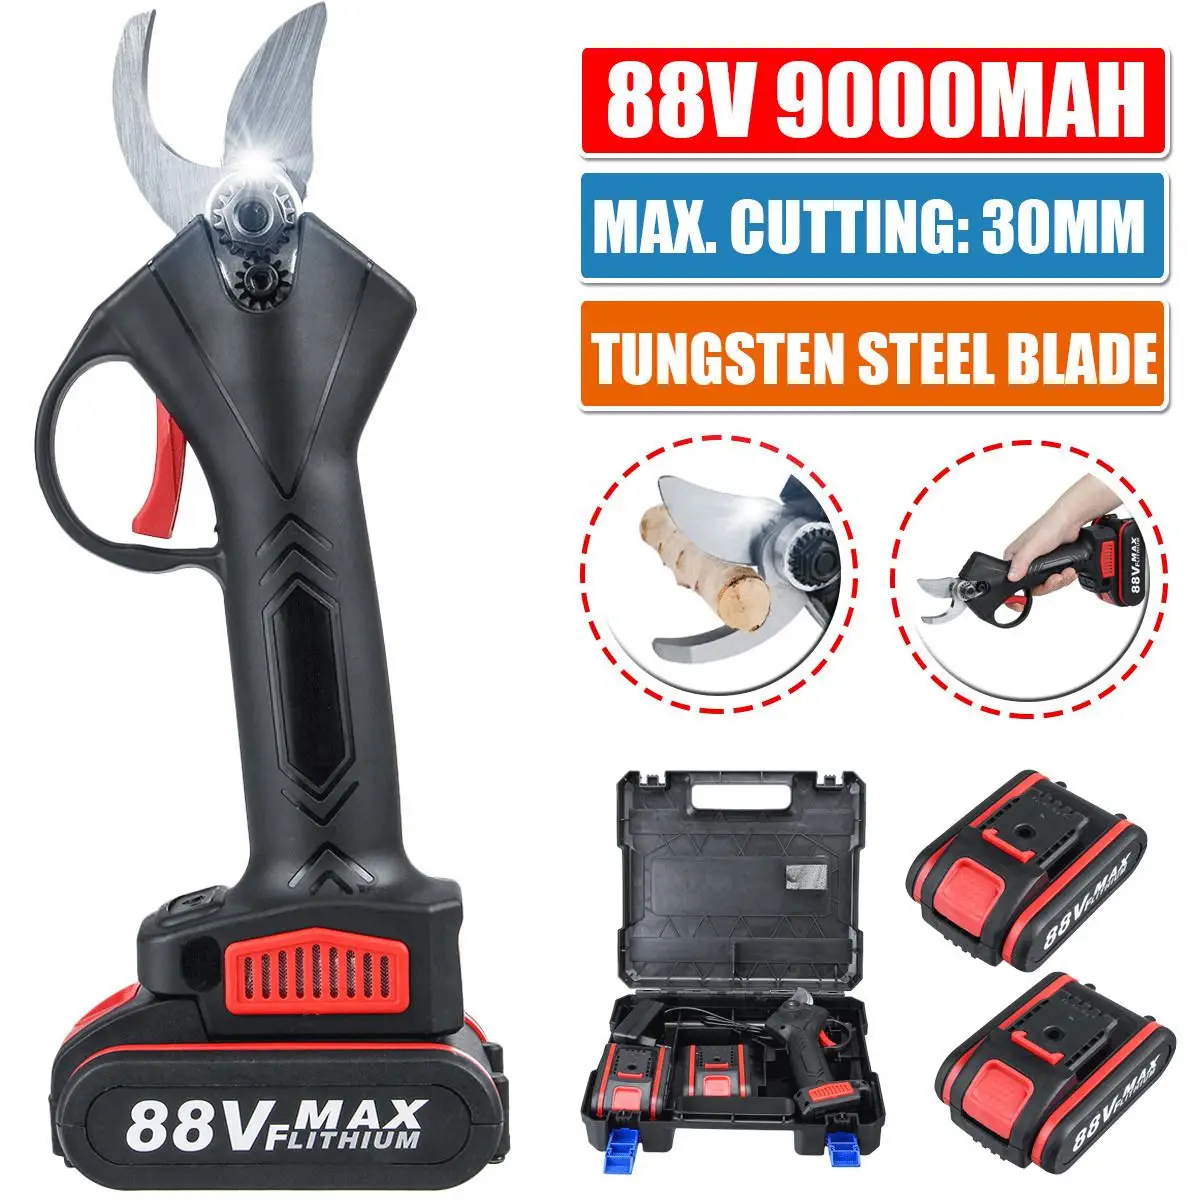 NEW 88V Cordless Pruner Lithium-ion Pruning Shear Efficient Fruit Tree Bonsai Pruning Electric Tree Branches Cutter Landscaping